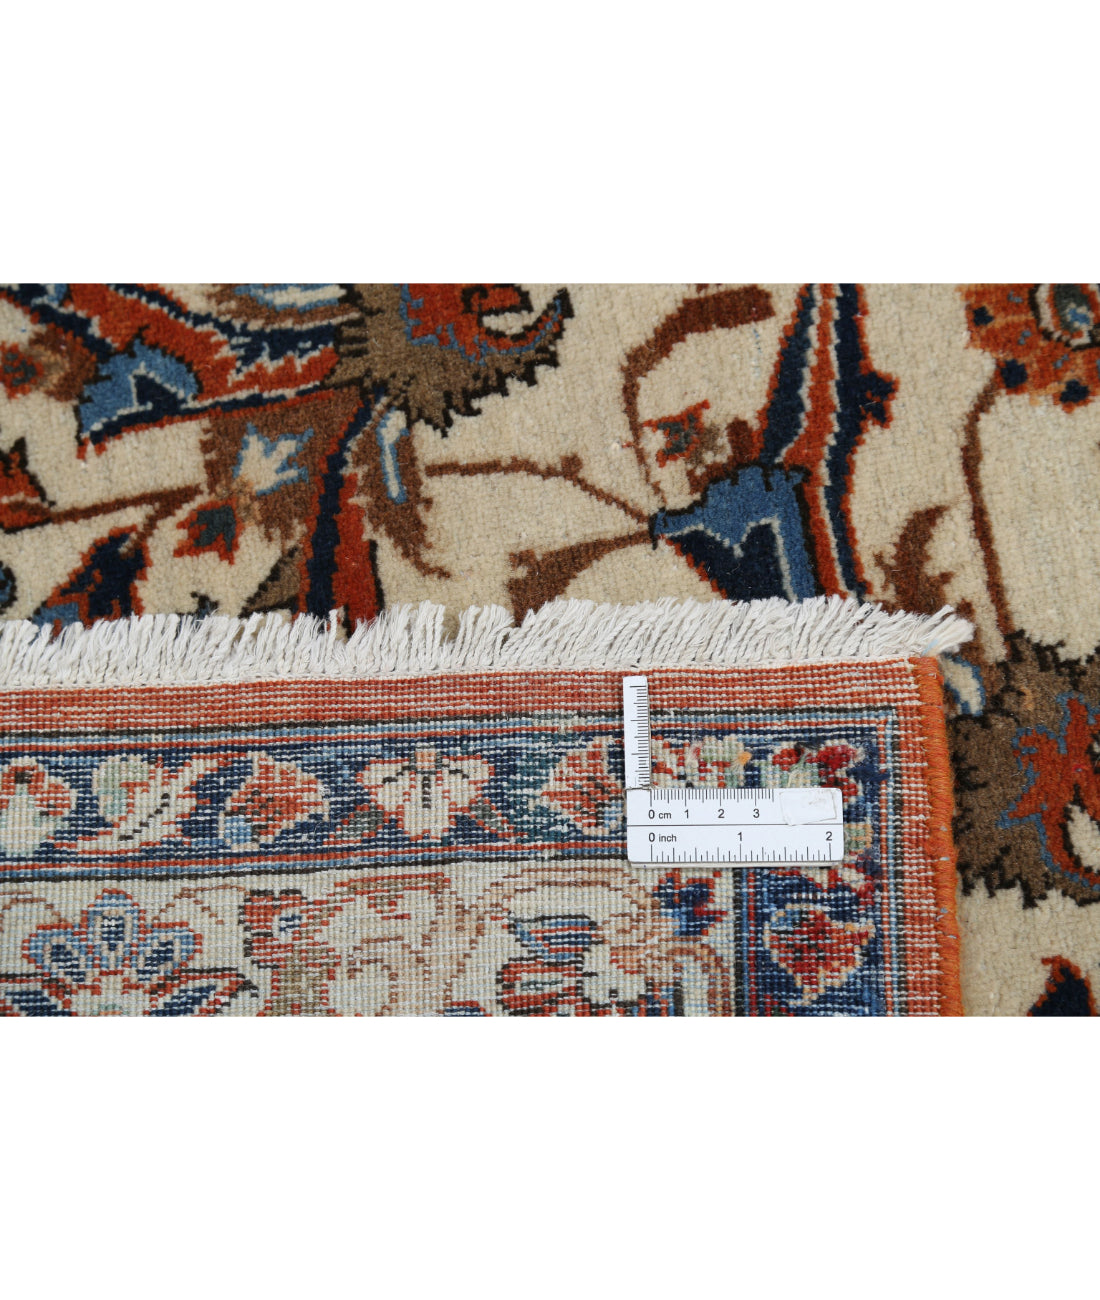 Isfahan 7'8'' X 11'9'' Hand-Knotted Wool Rug 7'8'' x 11'9'' (230 X 353) / Ivory / Red